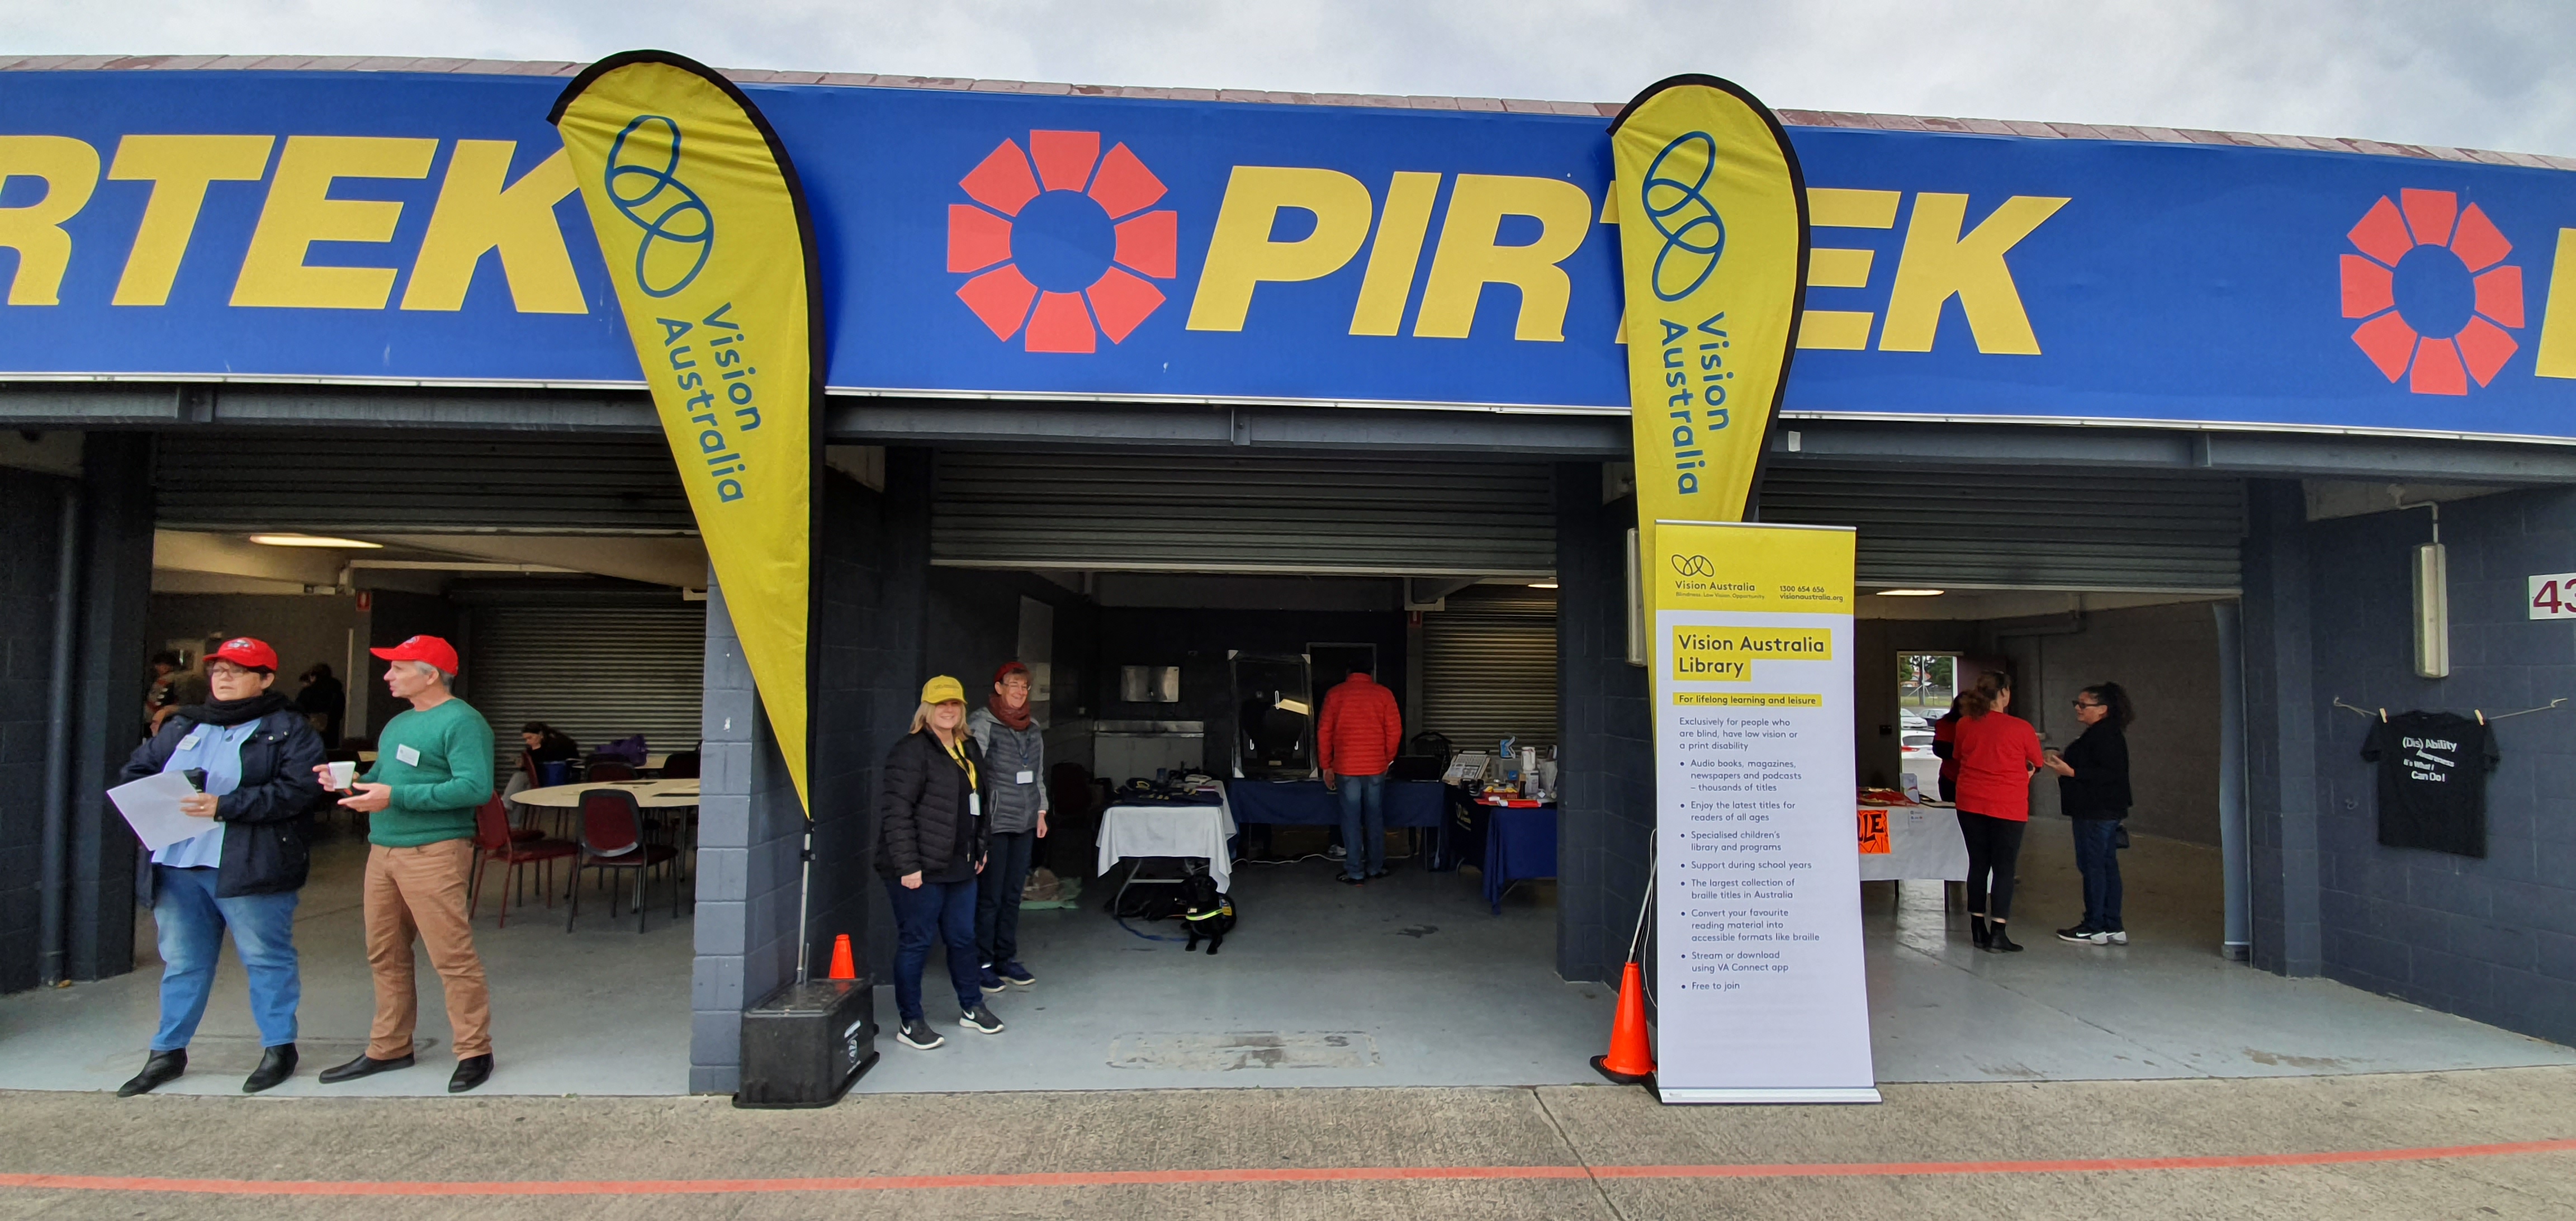 ""Vision Australia kiosk at In The Drivers Seat at Sandown Racecourse. Two yellow banners with the Vision Australia logo welcome people in.